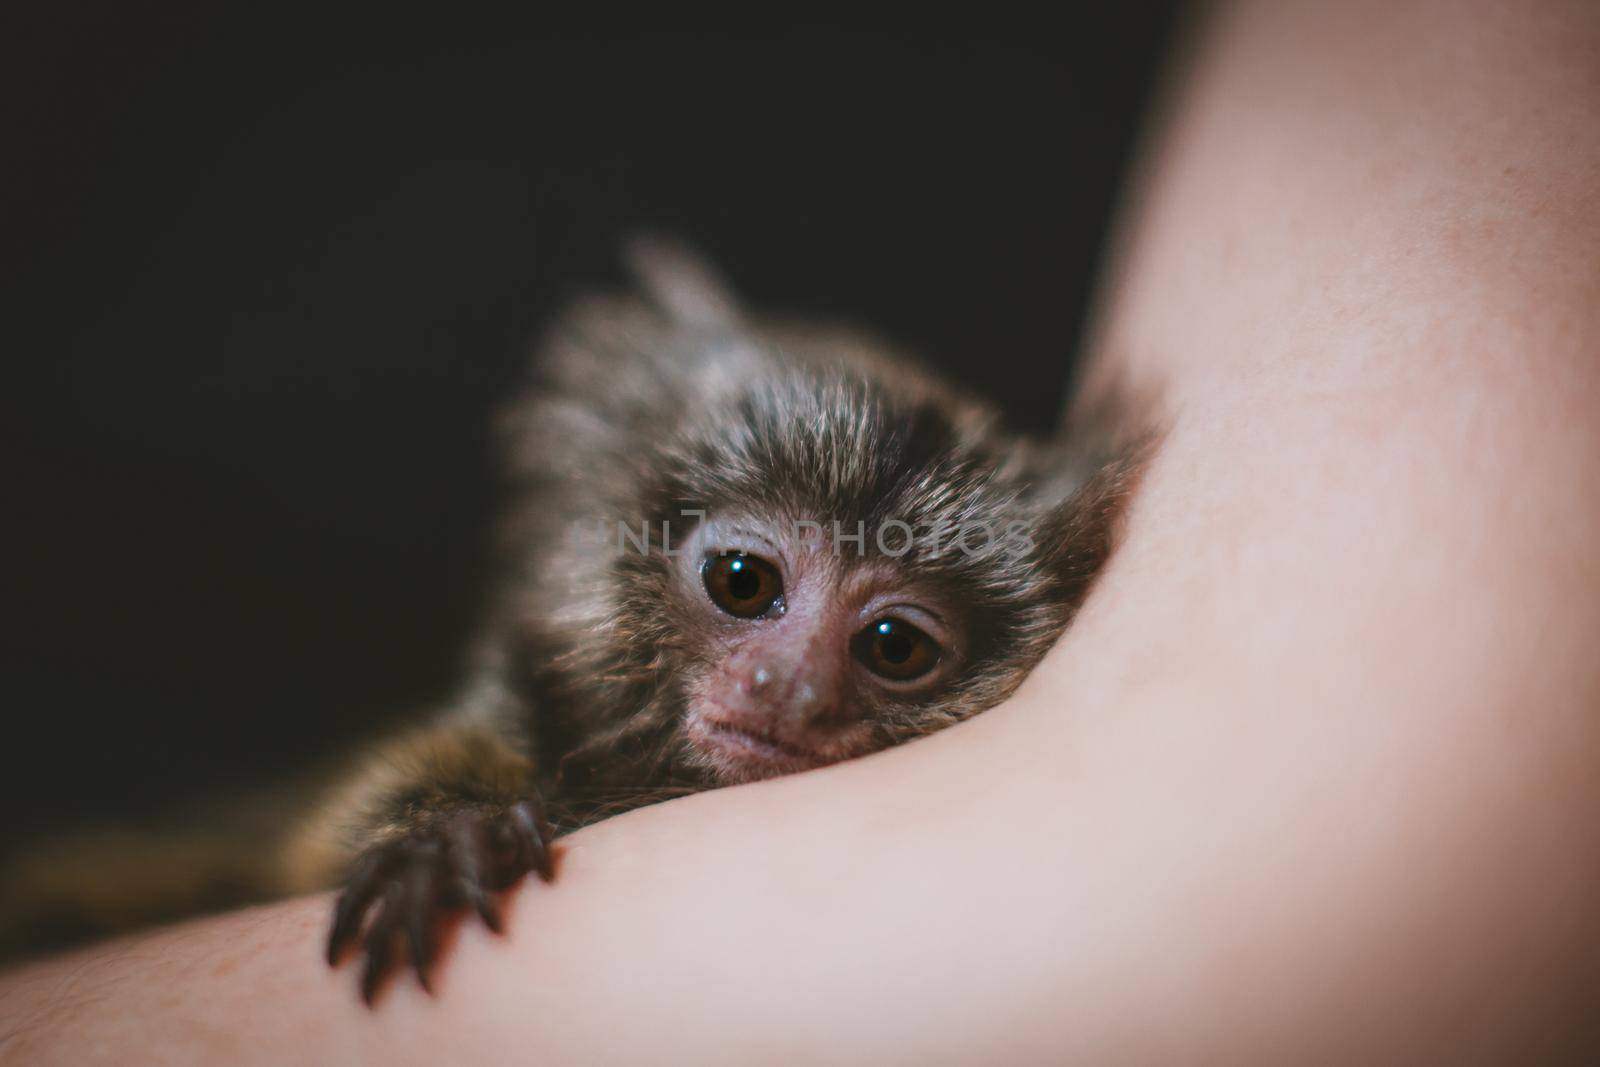 The new born common marmosets, Callithrix jacchus, 2 months old, isolated on black background